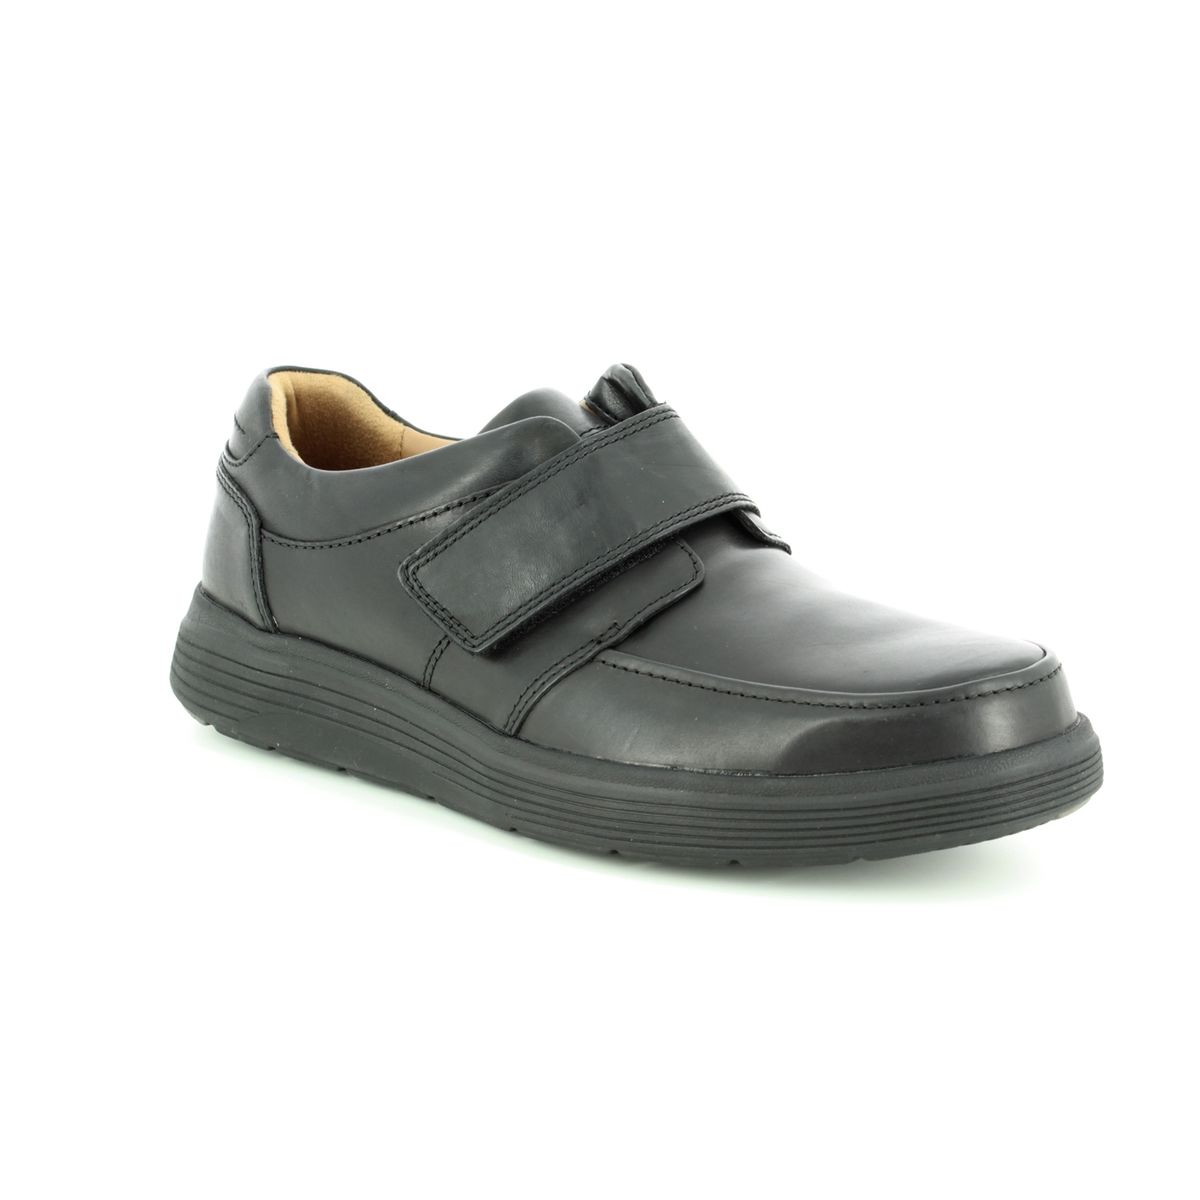 Clarks Un Abode Strap Black Leather Mens Comfort Shoes 3698-68H In Size 8.5 In Plain Black Leather H Width Fitting Extra Wide